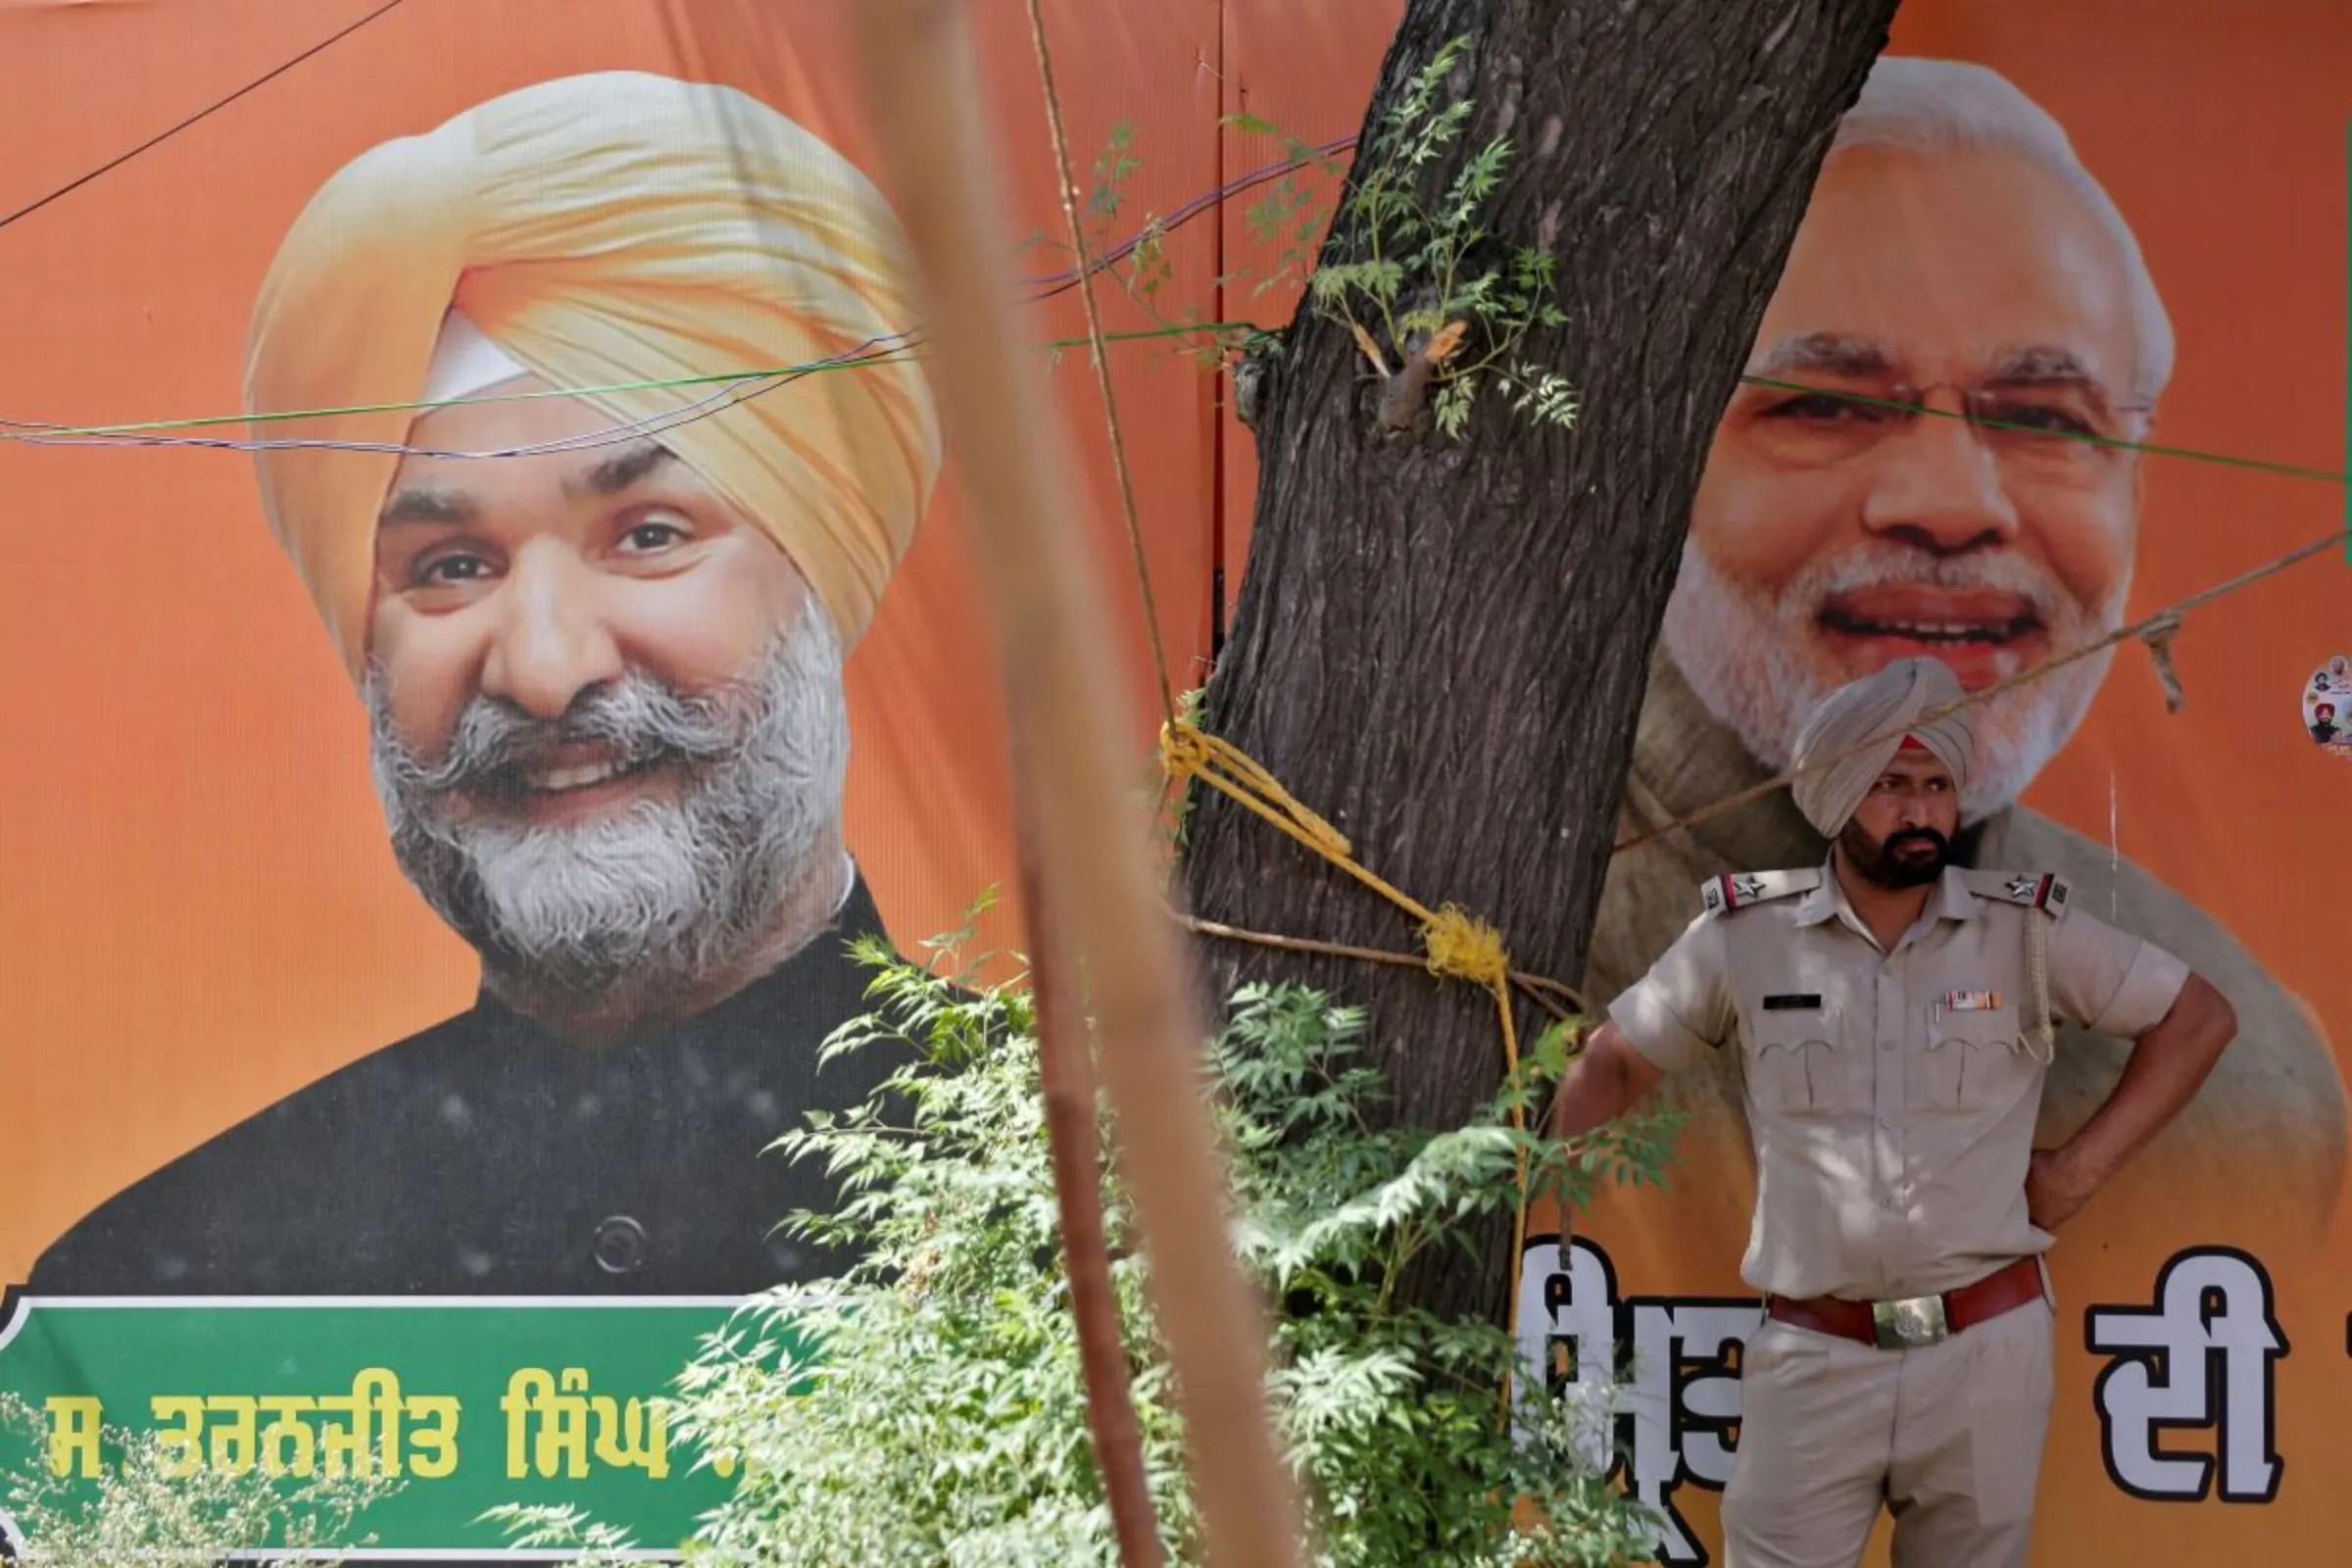 A police officer stands in front of a hoarding featuring India's Prime Minister Narendra Modi and Taranjit Singh Sandhu, an election candidate of India's ruling Bharatiya Janata Party (BJP) for Amritsar constituency, before a farmers' protest in Amritsar, India, May 28, 2024. REUTERS/Stringer